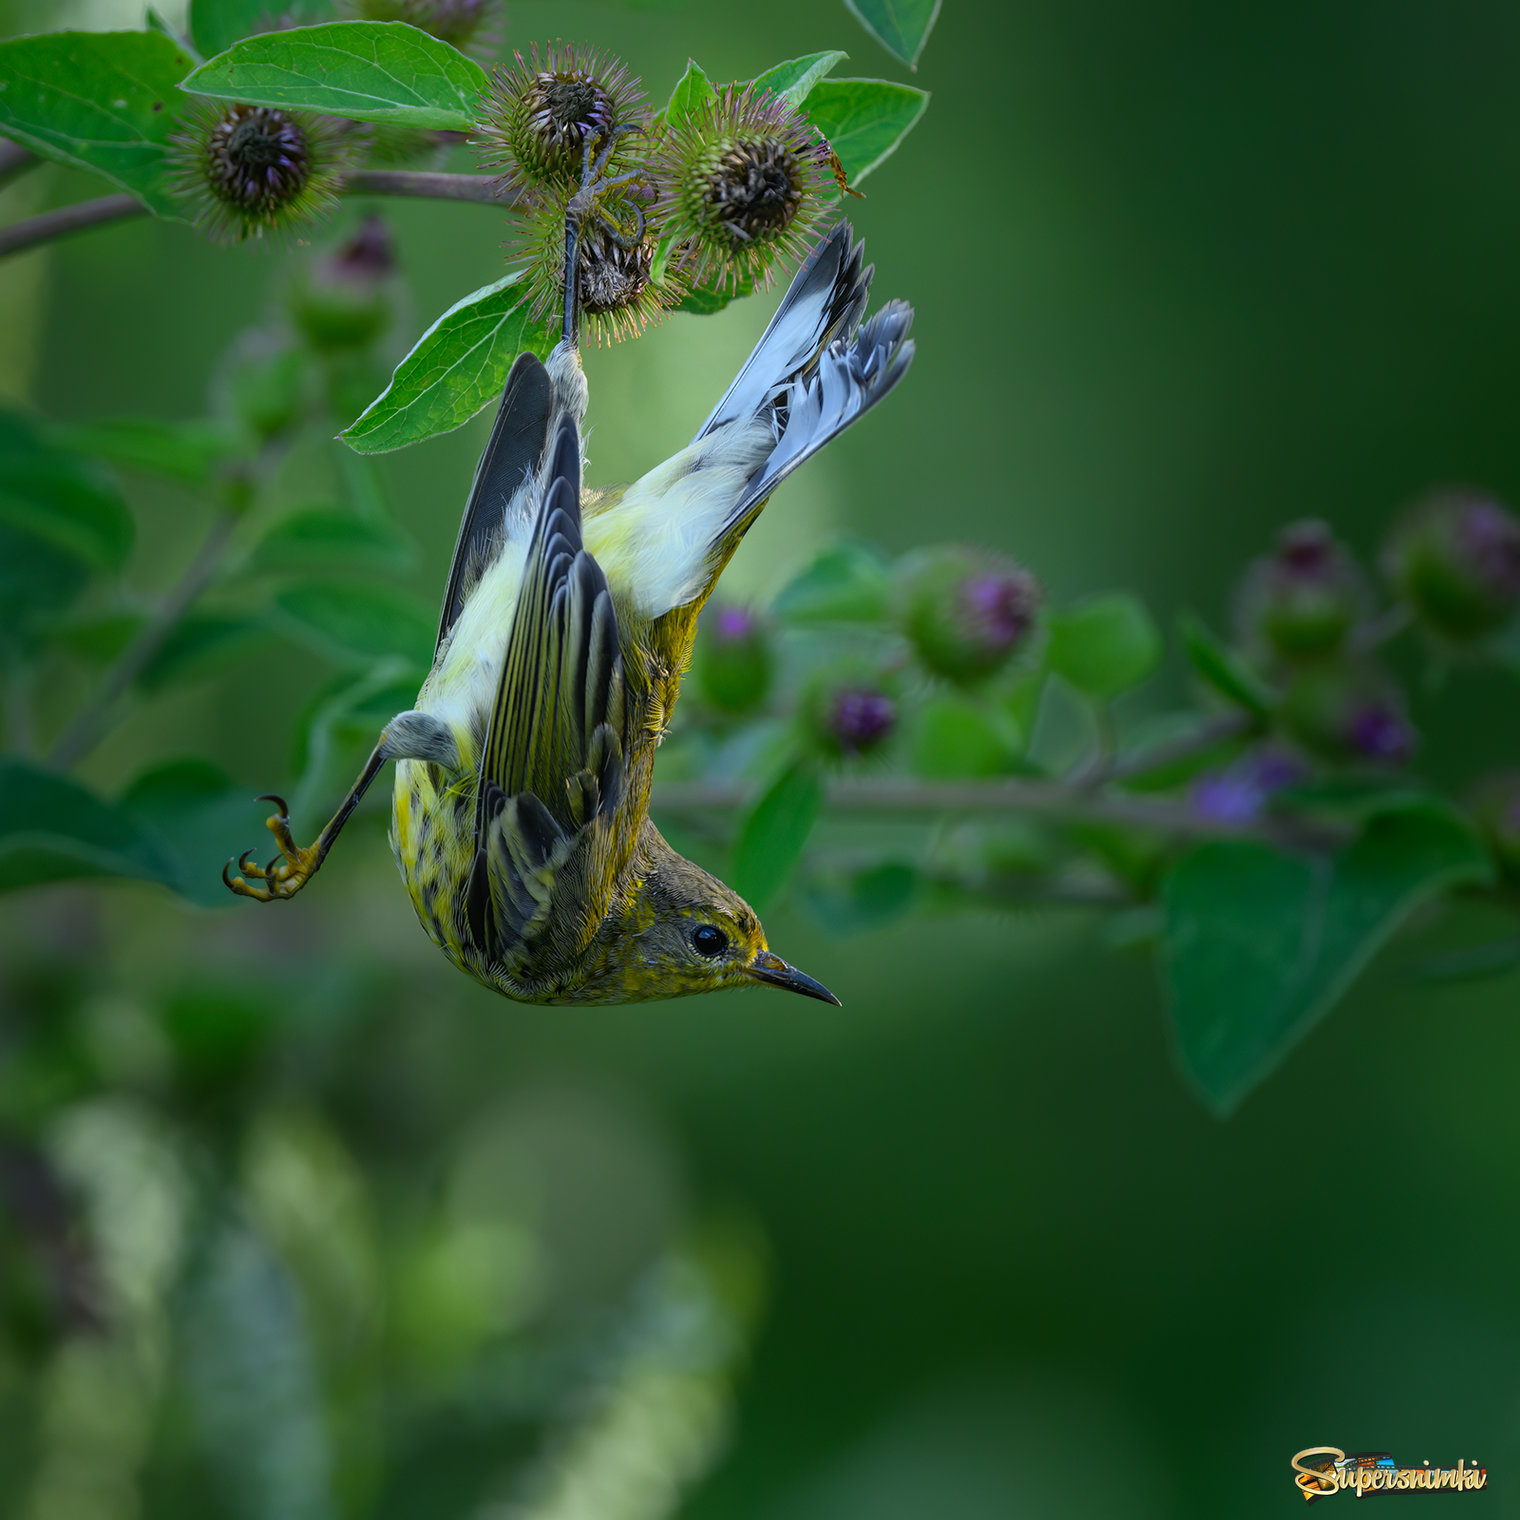 Cape May warbler (immature)